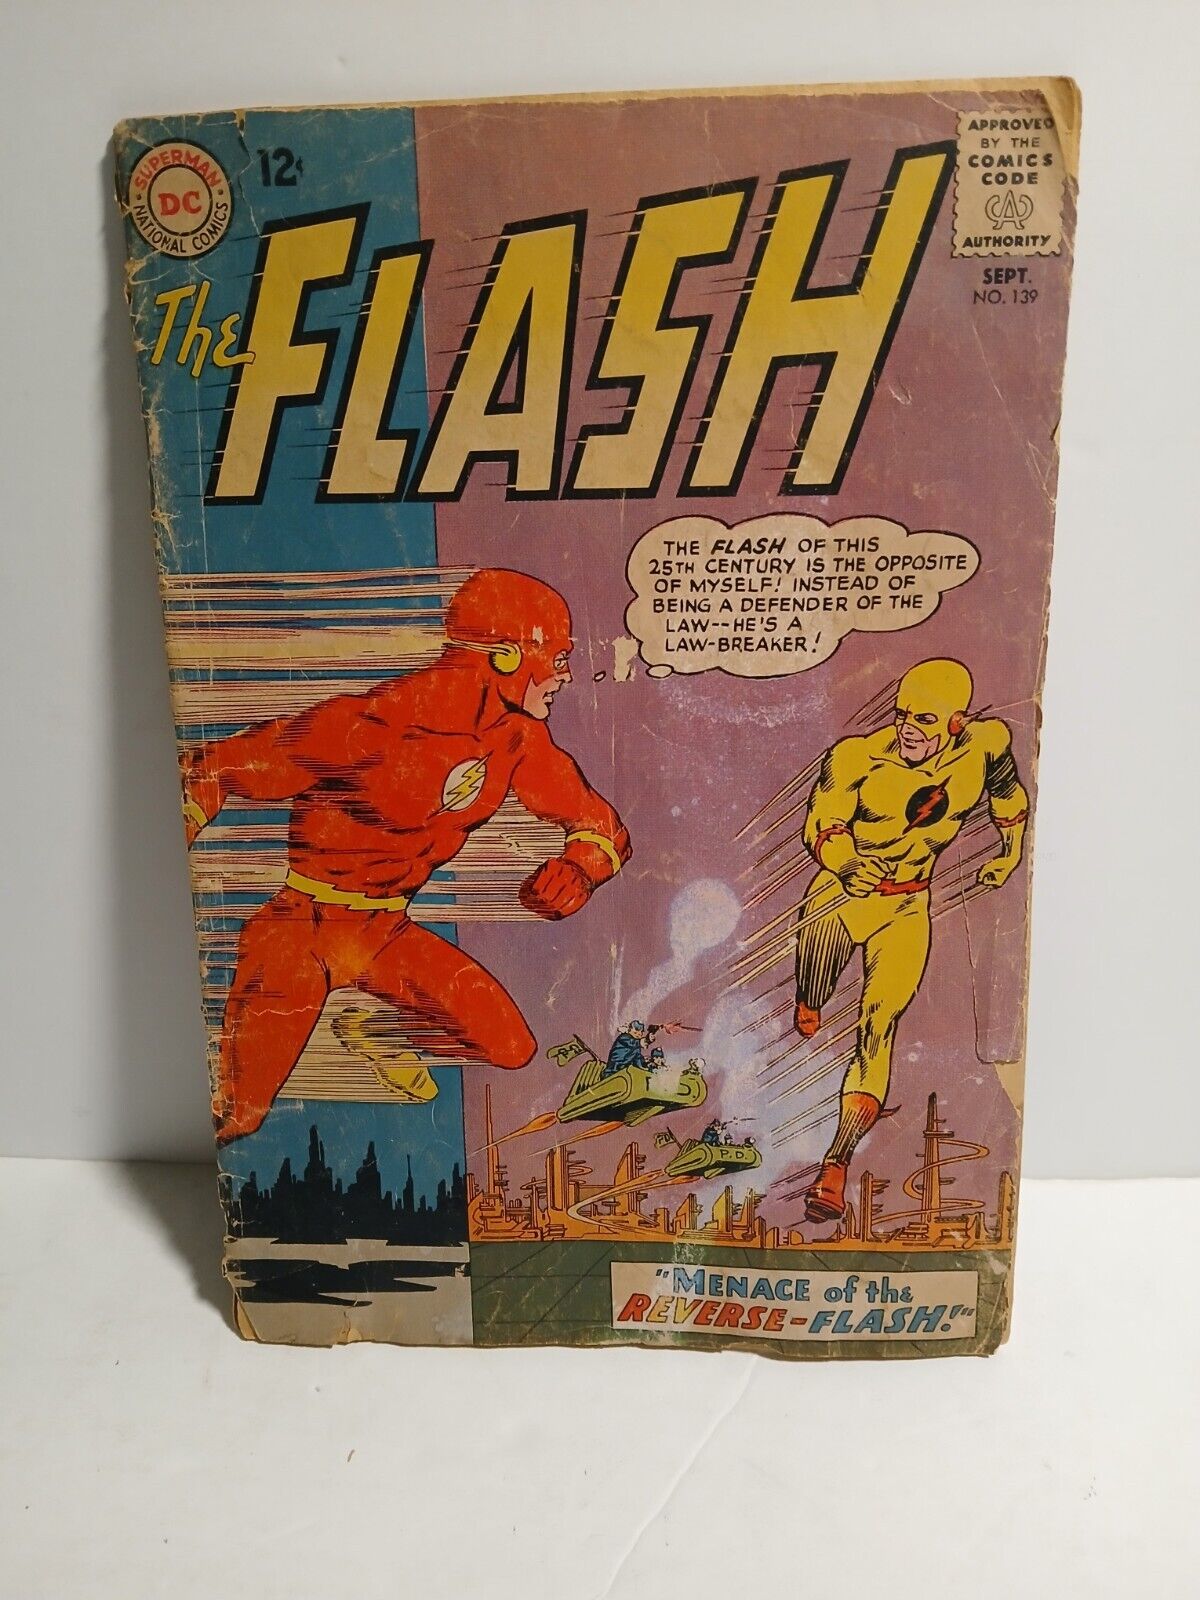 THE FLASH COMIC BOOK Sept. 1963 - #139